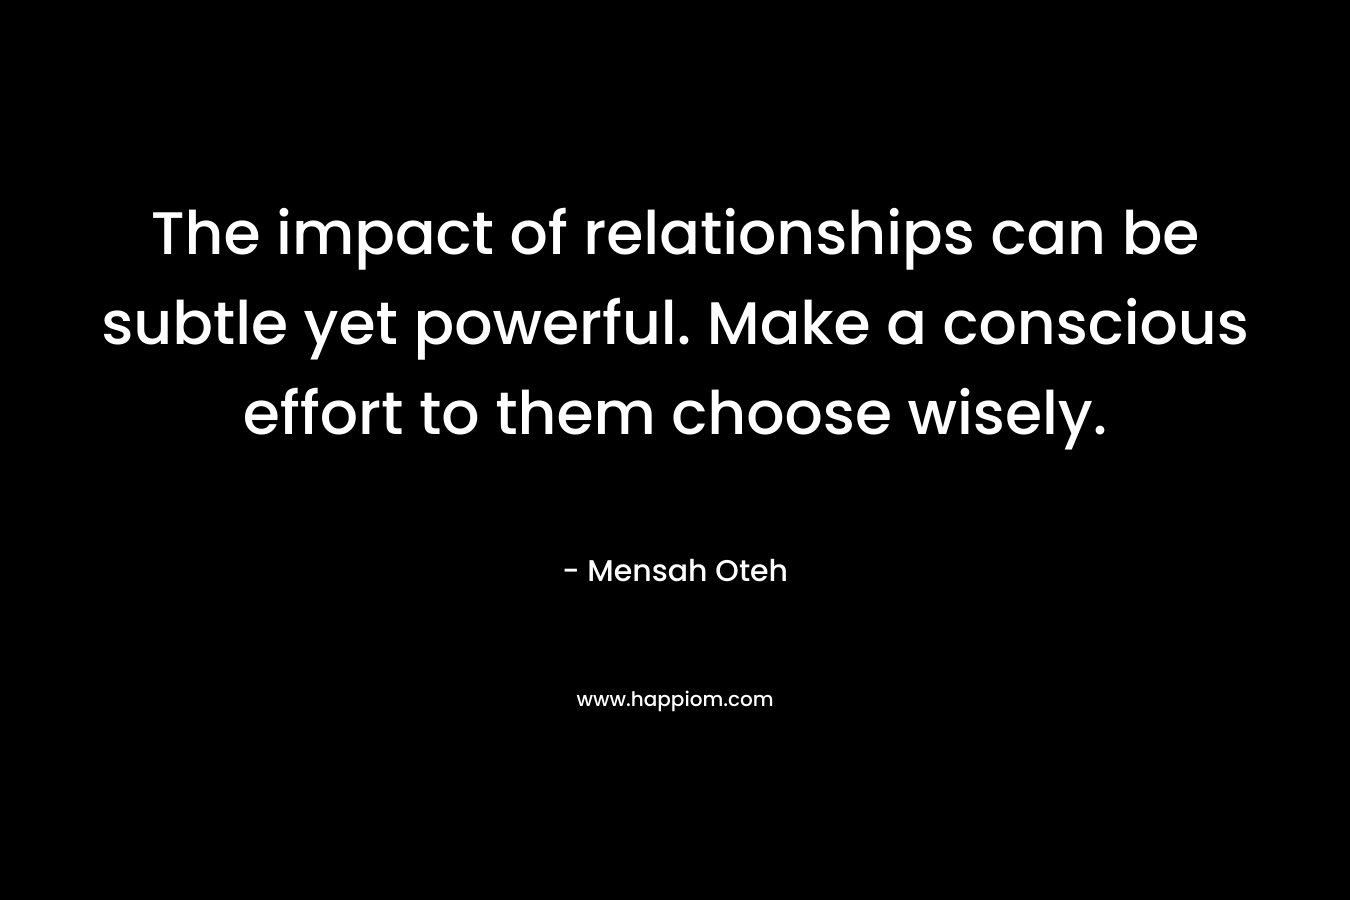 The impact of relationships can be subtle yet powerful. Make a conscious effort to them choose wisely. – Mensah Oteh